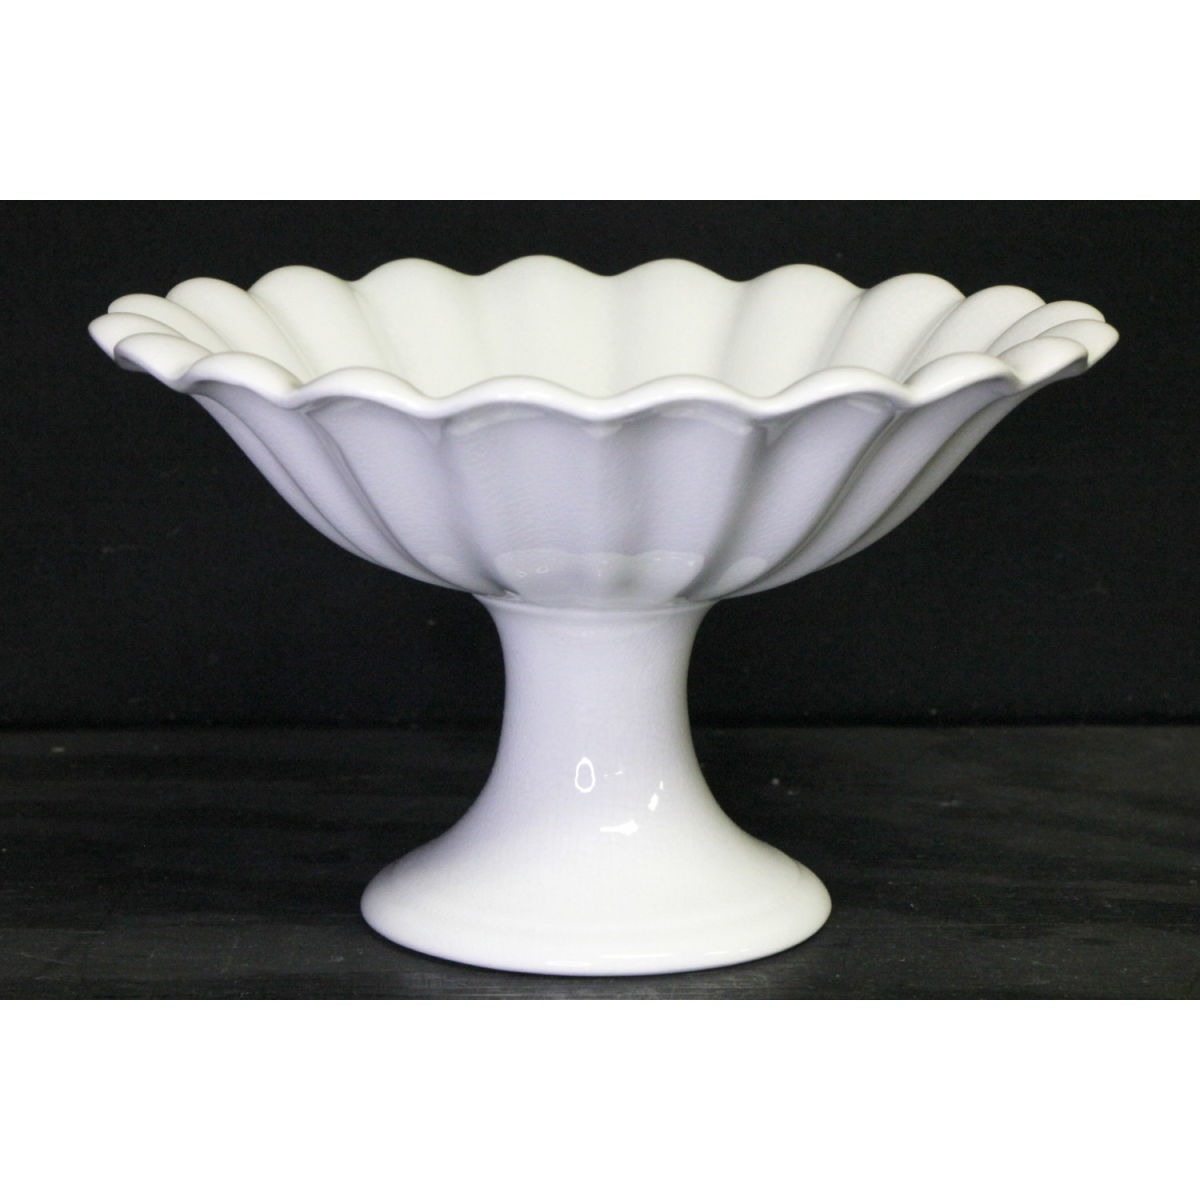 Tall Fluted Ironstone 8" diameter Compote